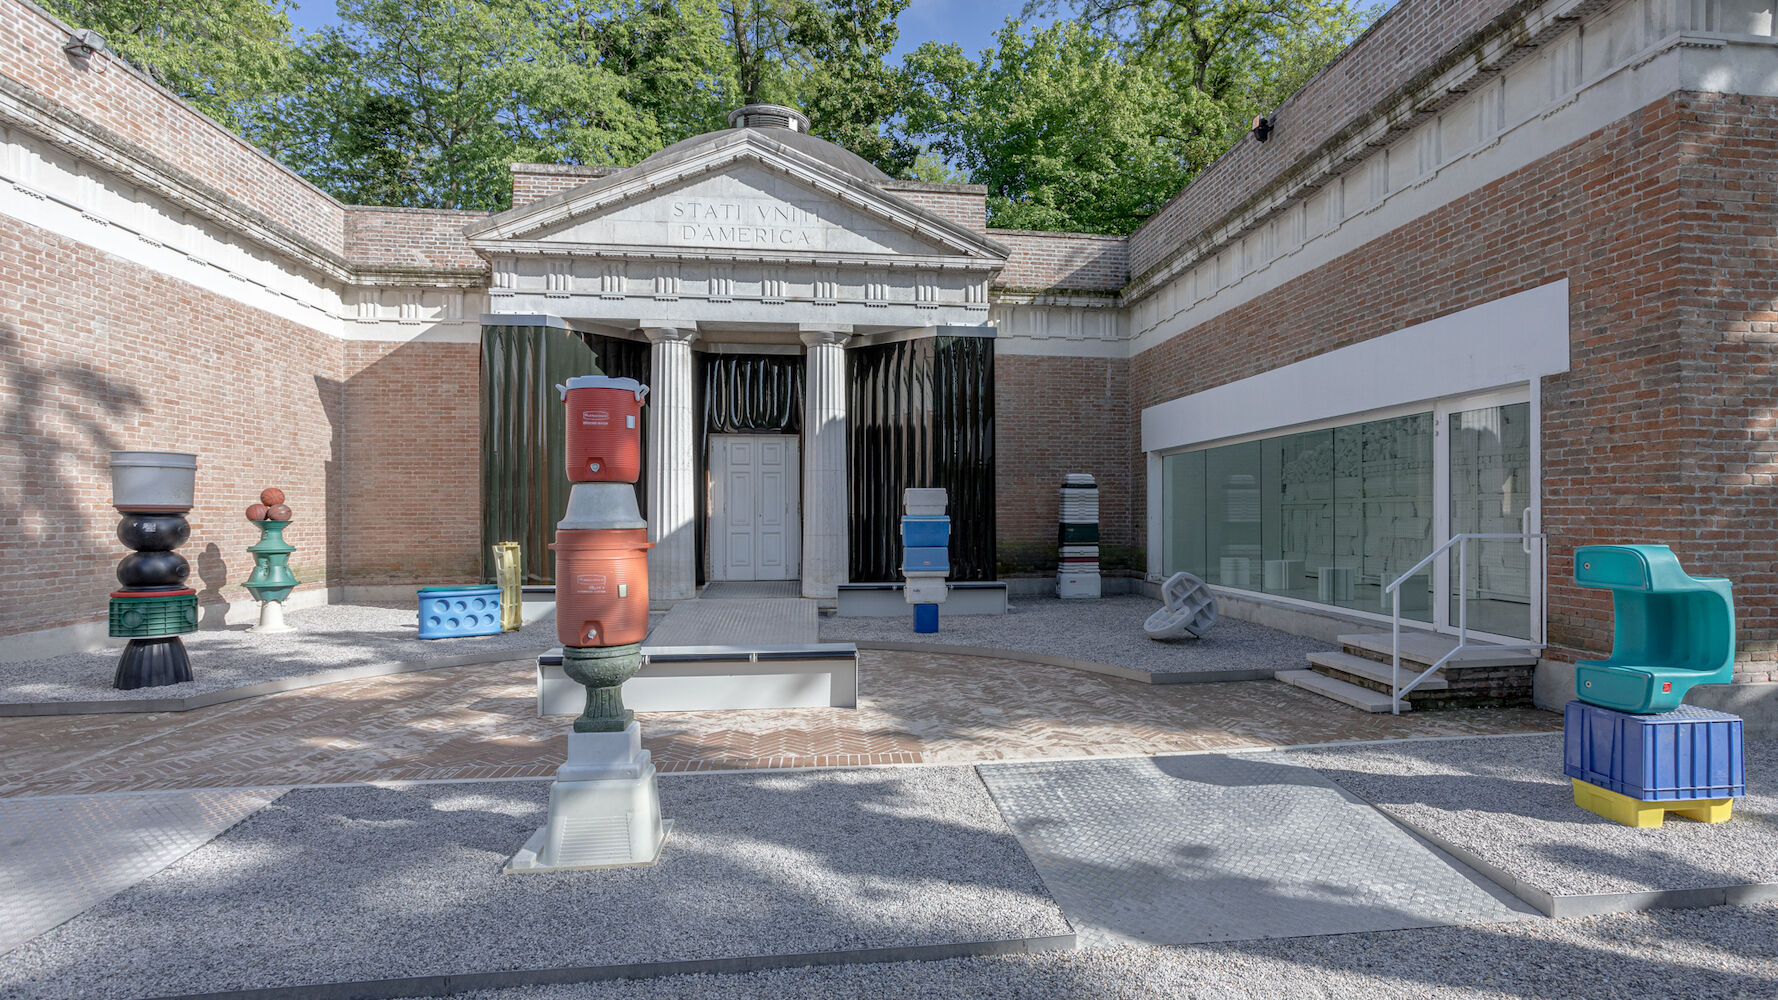 Open Call Issued for Applications for U.S. Pavilion at the 2025 Venice Architecture Biennale